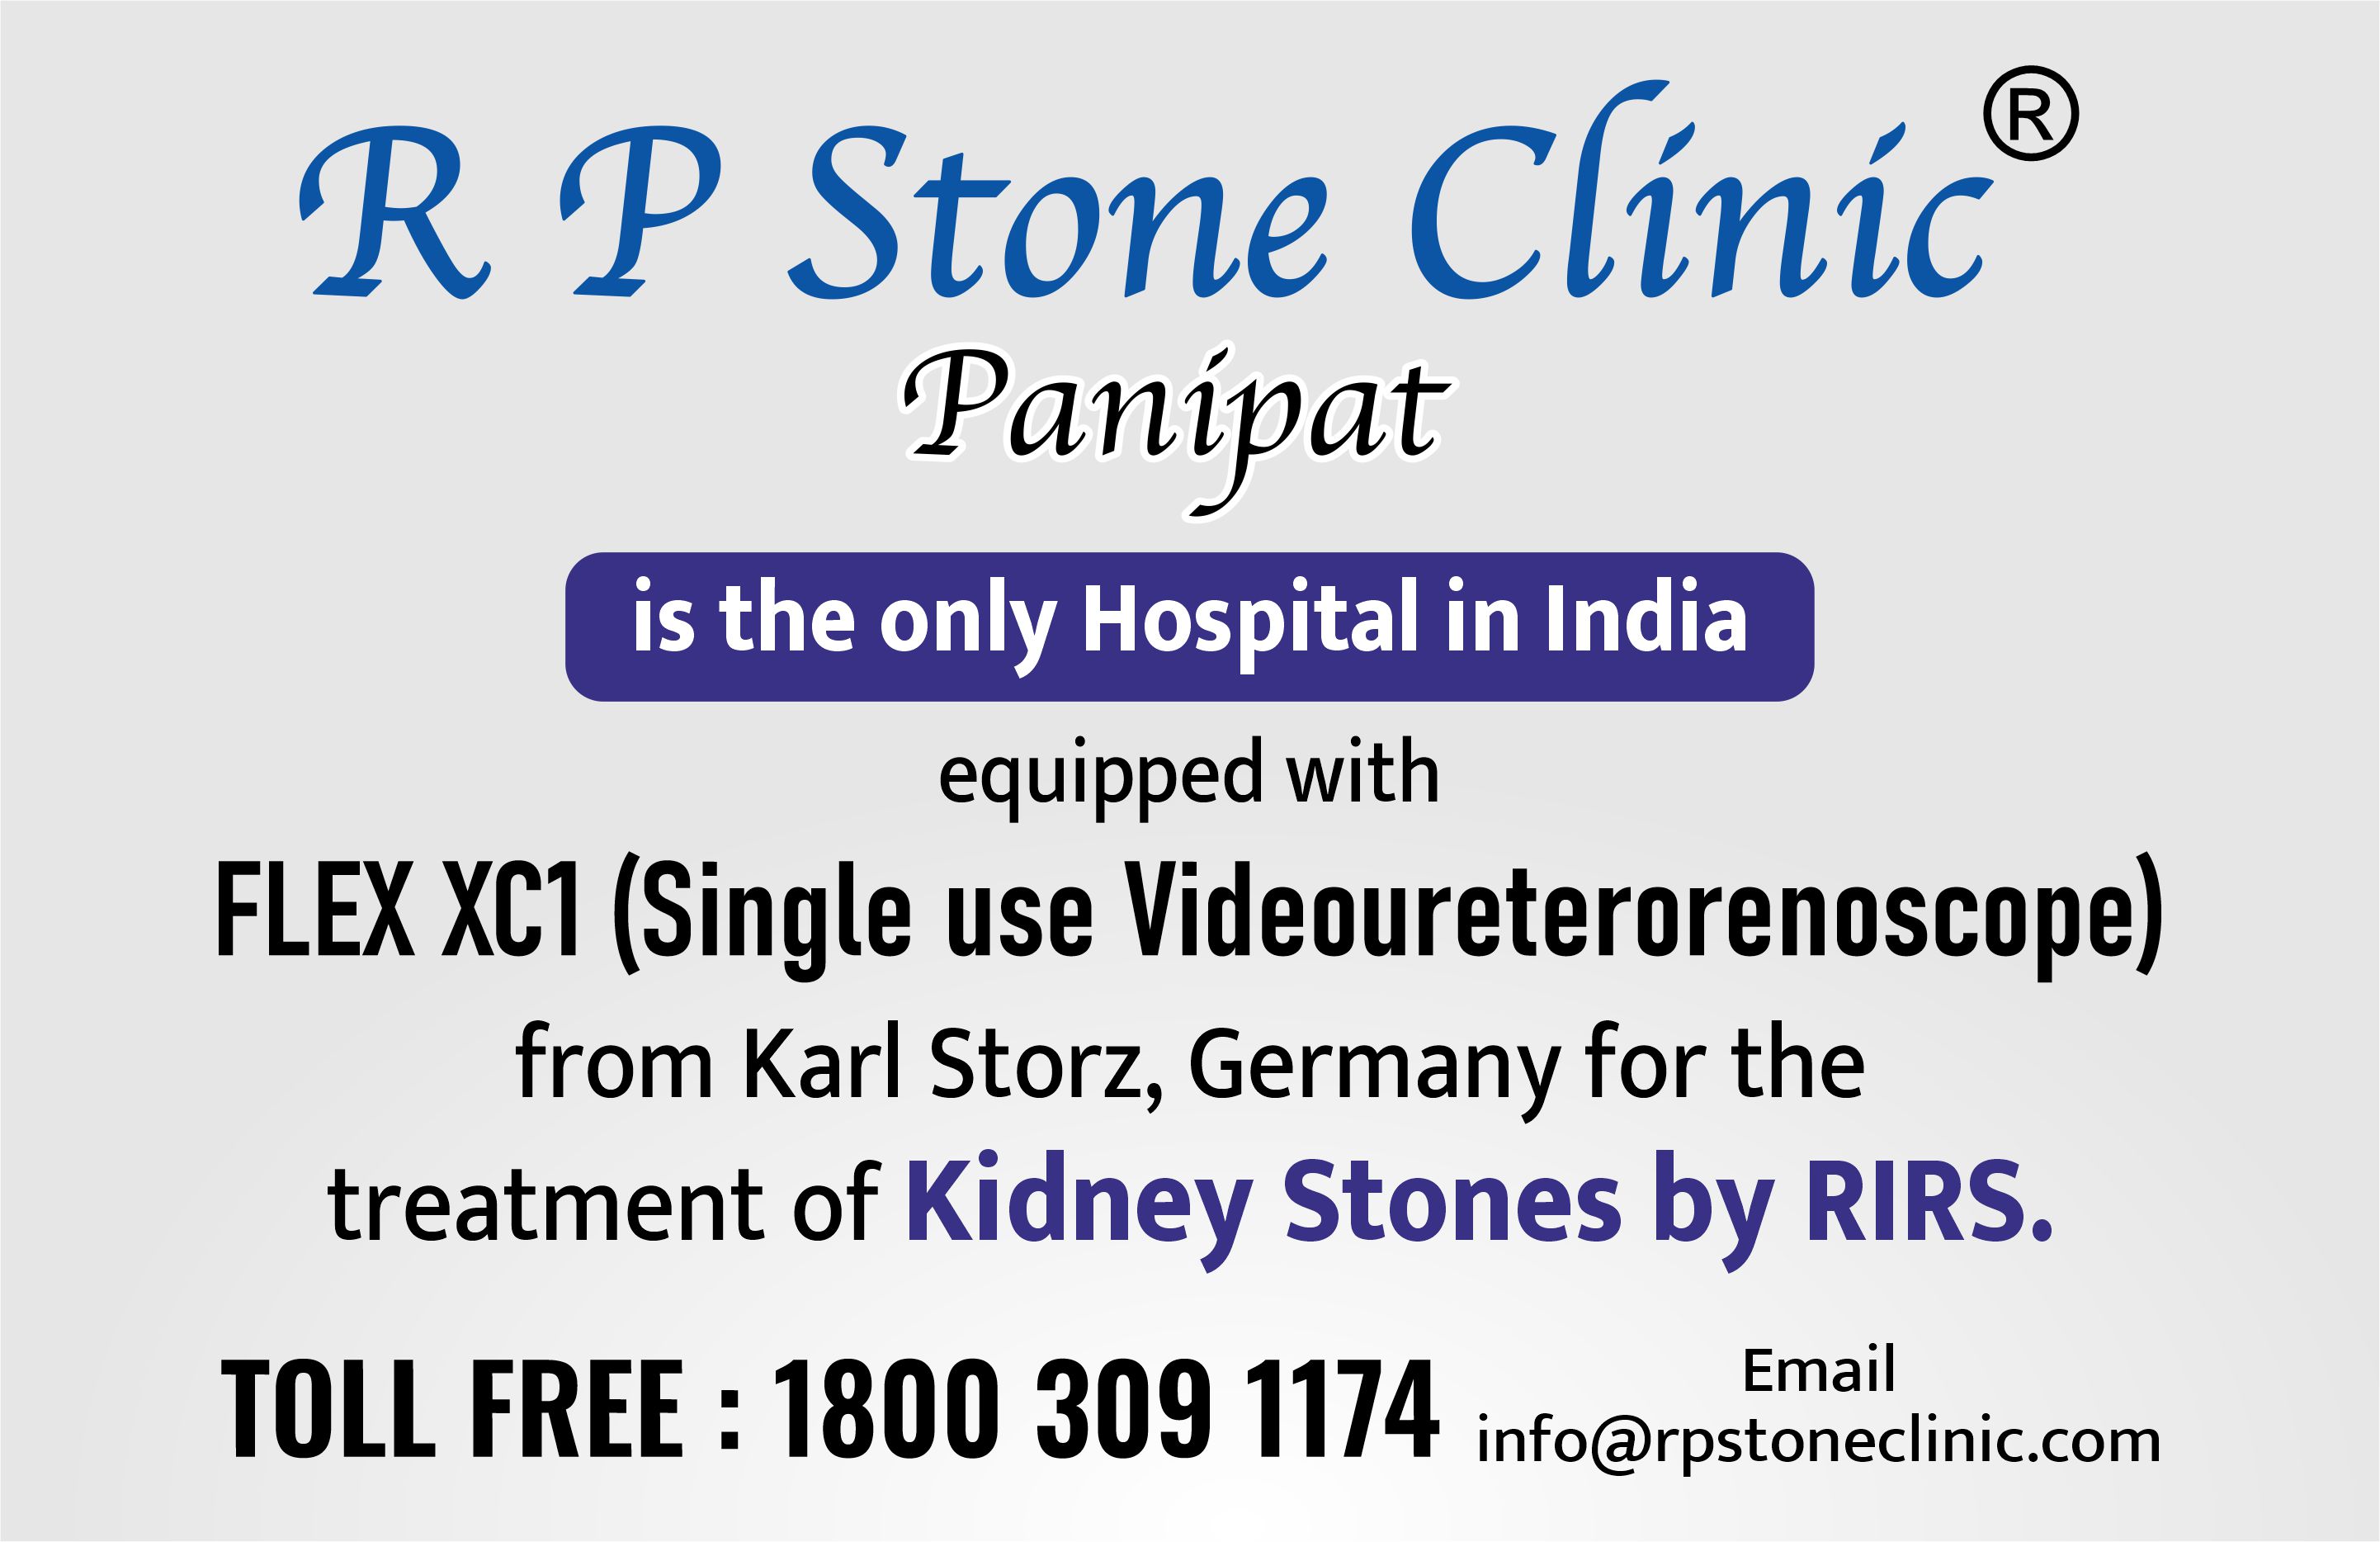 r-p-stone-clinic-is-the-only-hospital-in-india